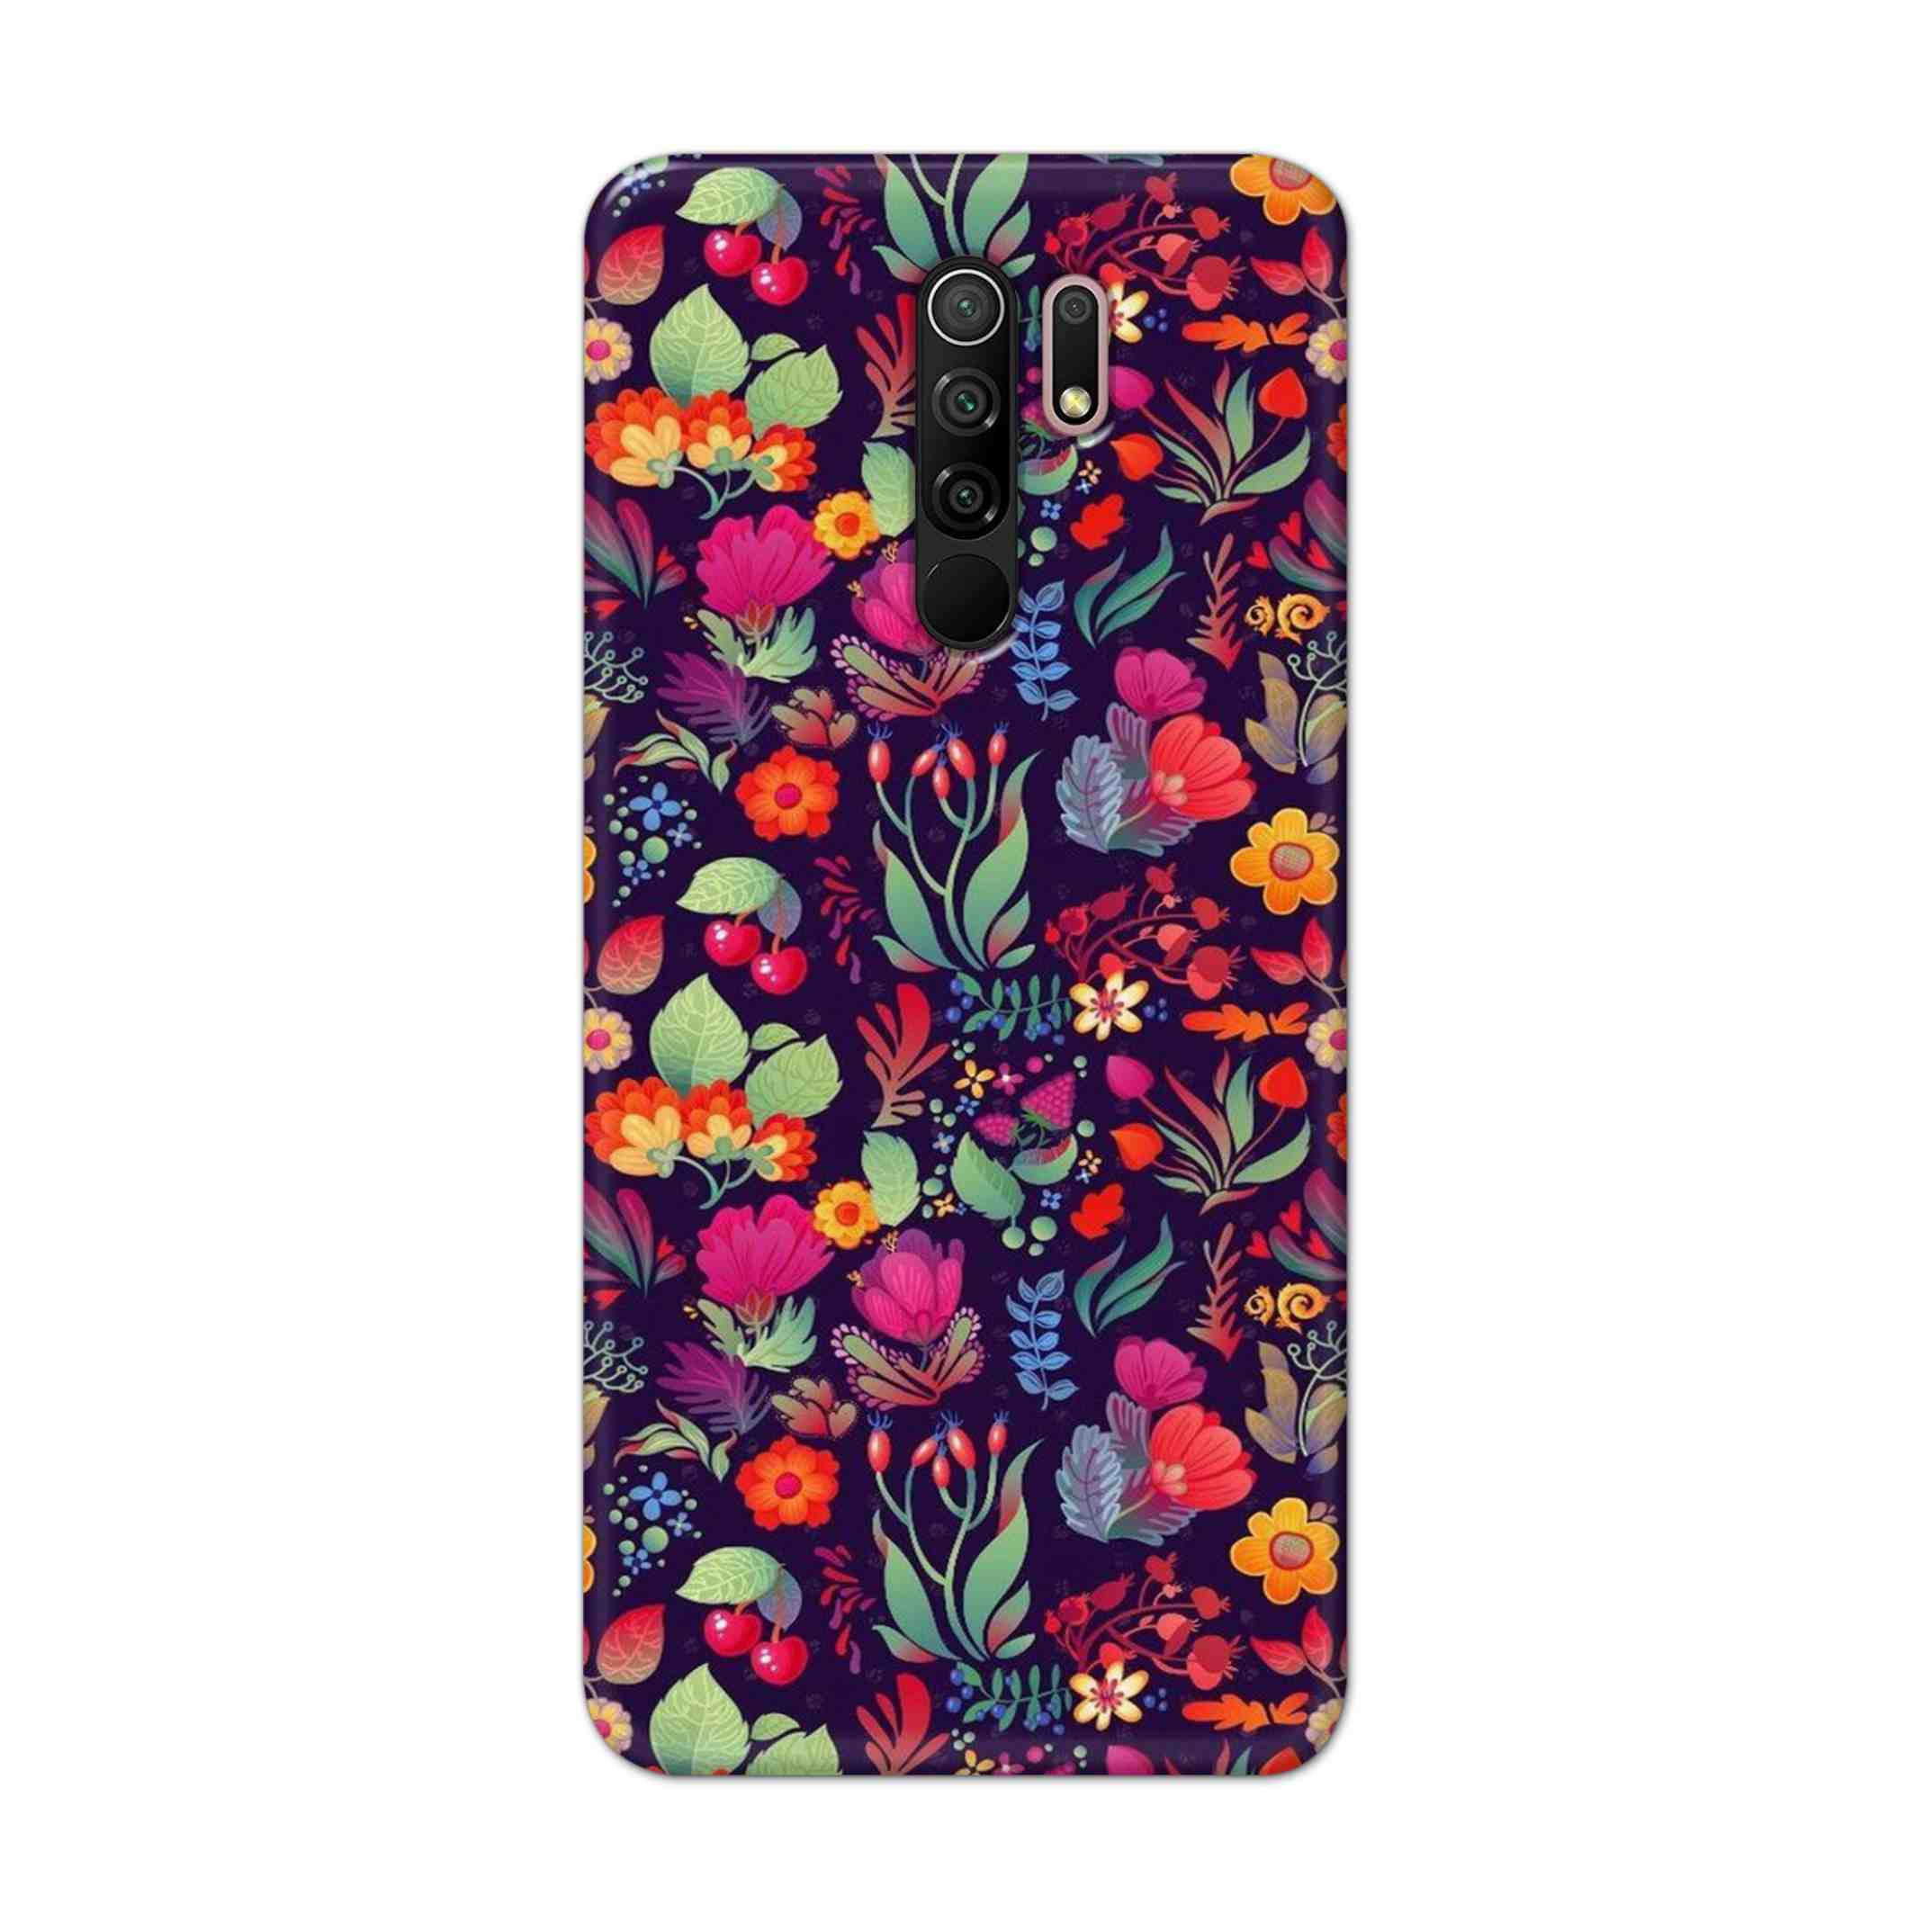 Buy Fruits Flower Hard Back Mobile Phone Case Cover For Xiaomi Redmi 9 Prime Online